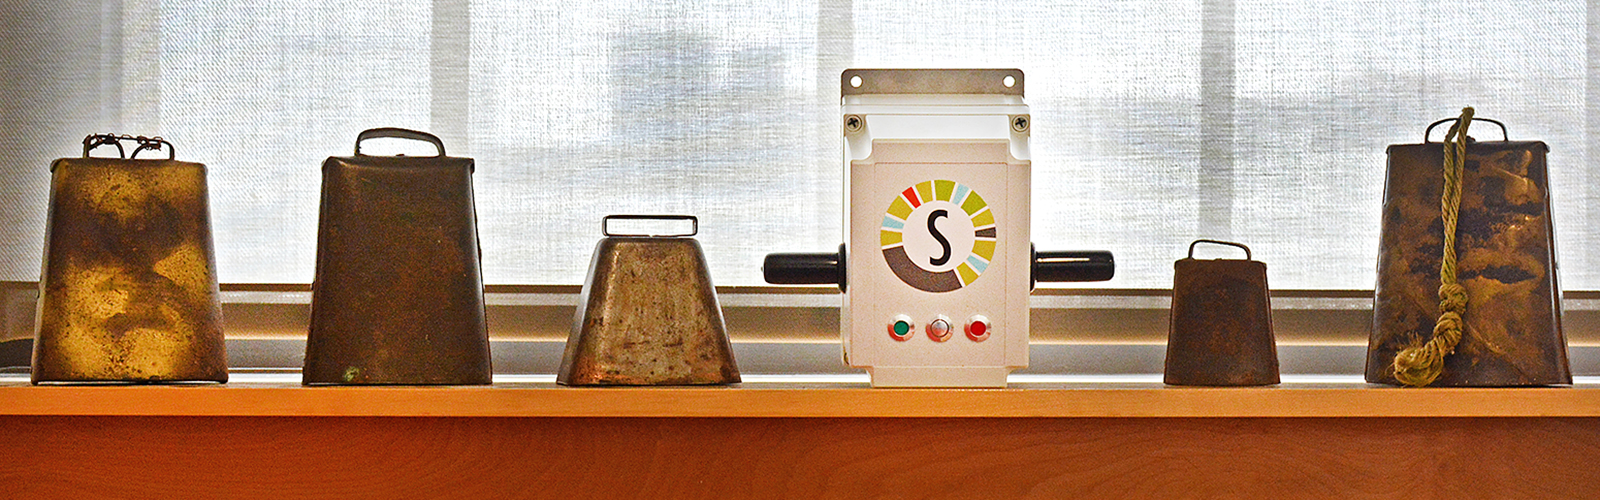 The SomaDetect’s sensor, framed by a collection of vintage cow bells given to the company by area farmers who use their technology to produce better milk.